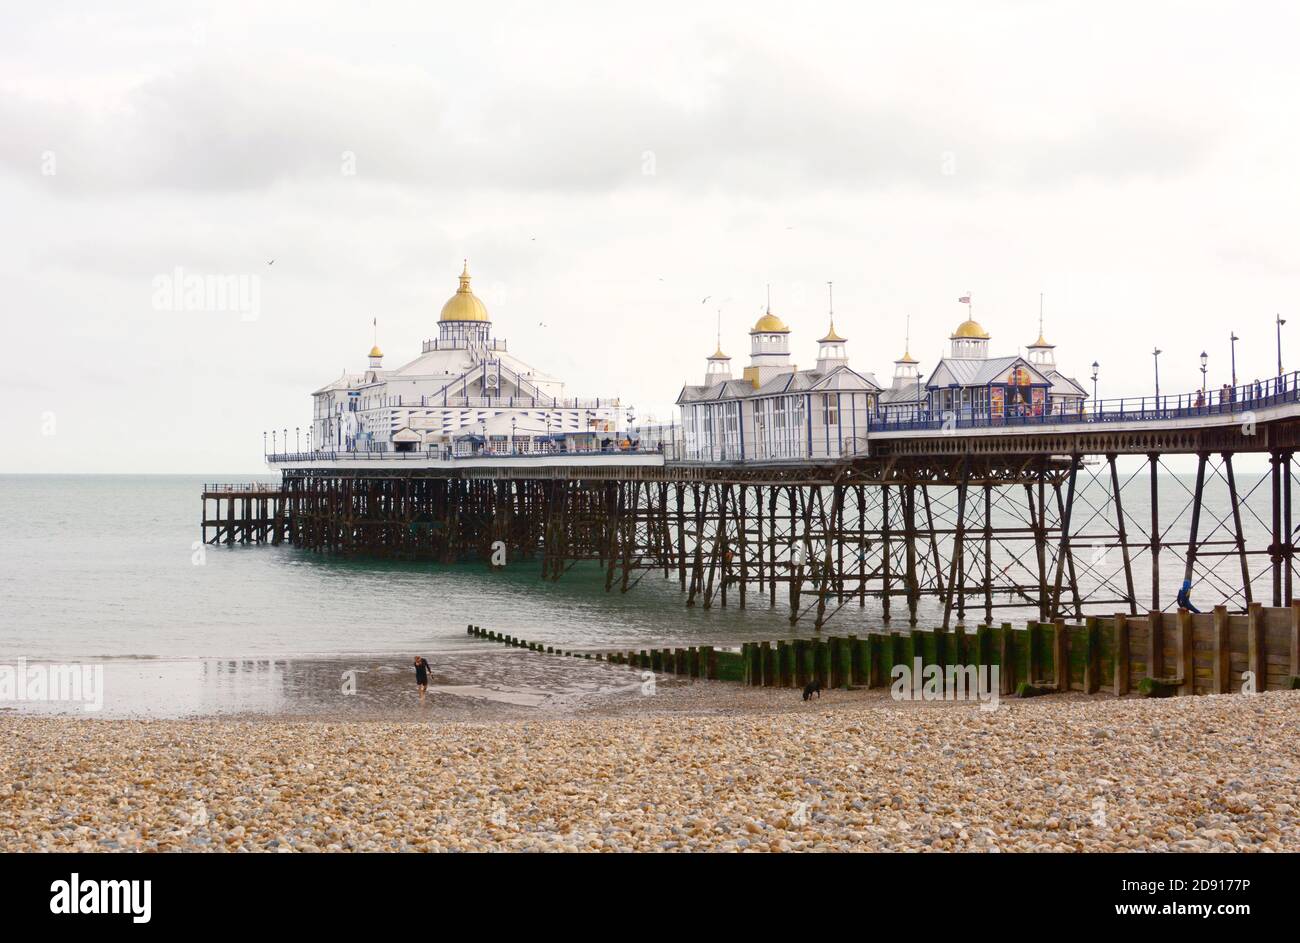 EASTBOURNE, UK - AUGUST 28, 2019: 300m long pleasure pier with gold-topped towers, built out into the sea in Eastbourne, UK on August 28, 2019 Stock Photo